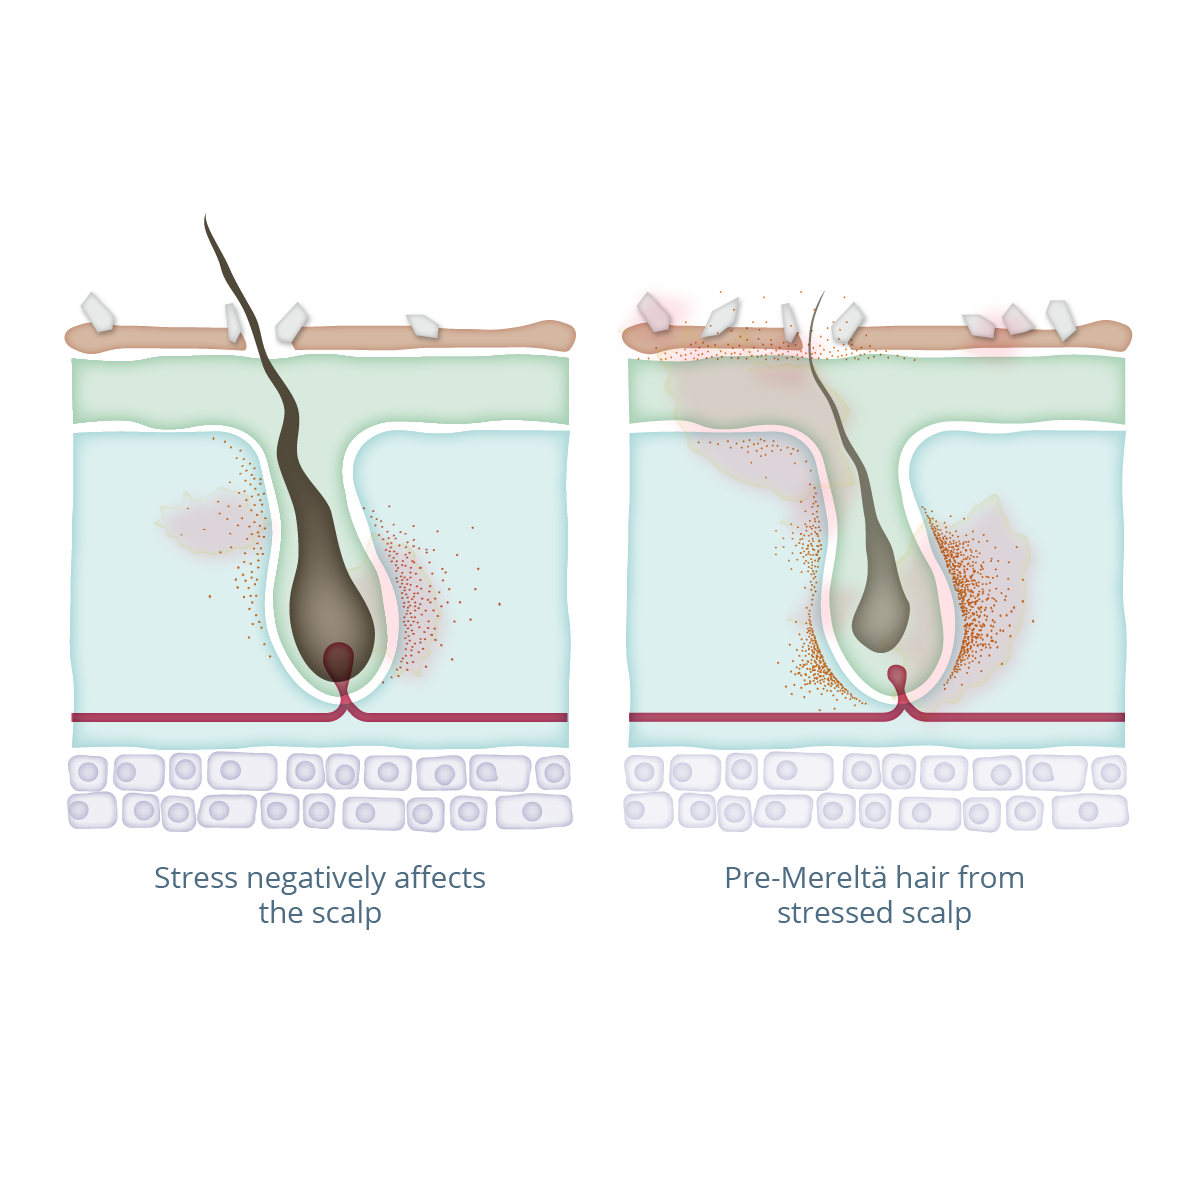 Merelta hair growth process and science